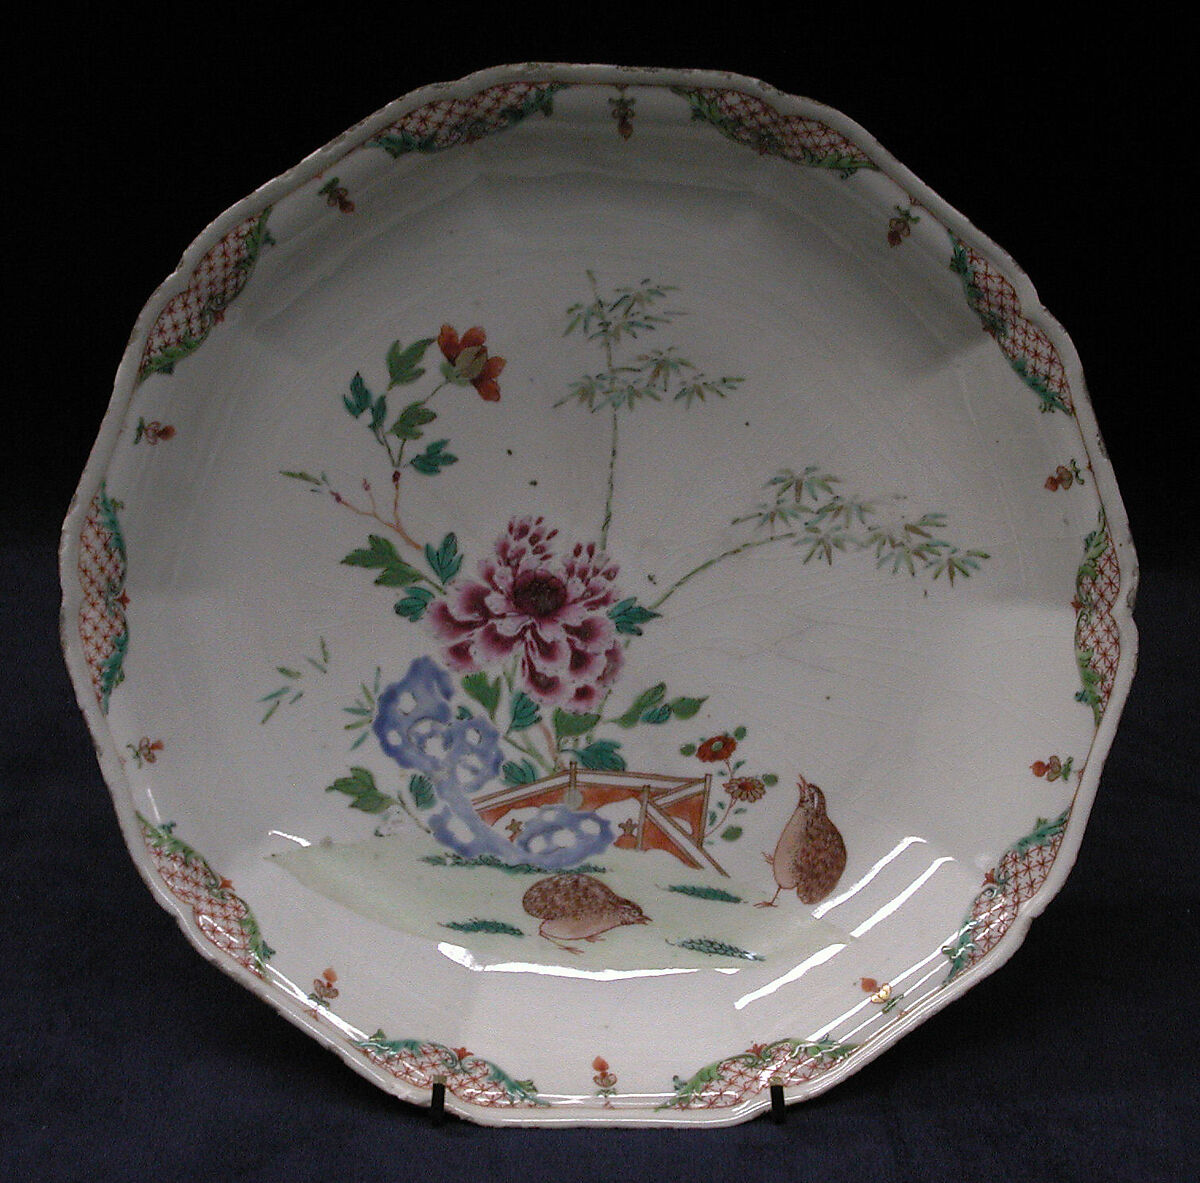 Dish, Hard-paste porcelain, possibly Chinese 